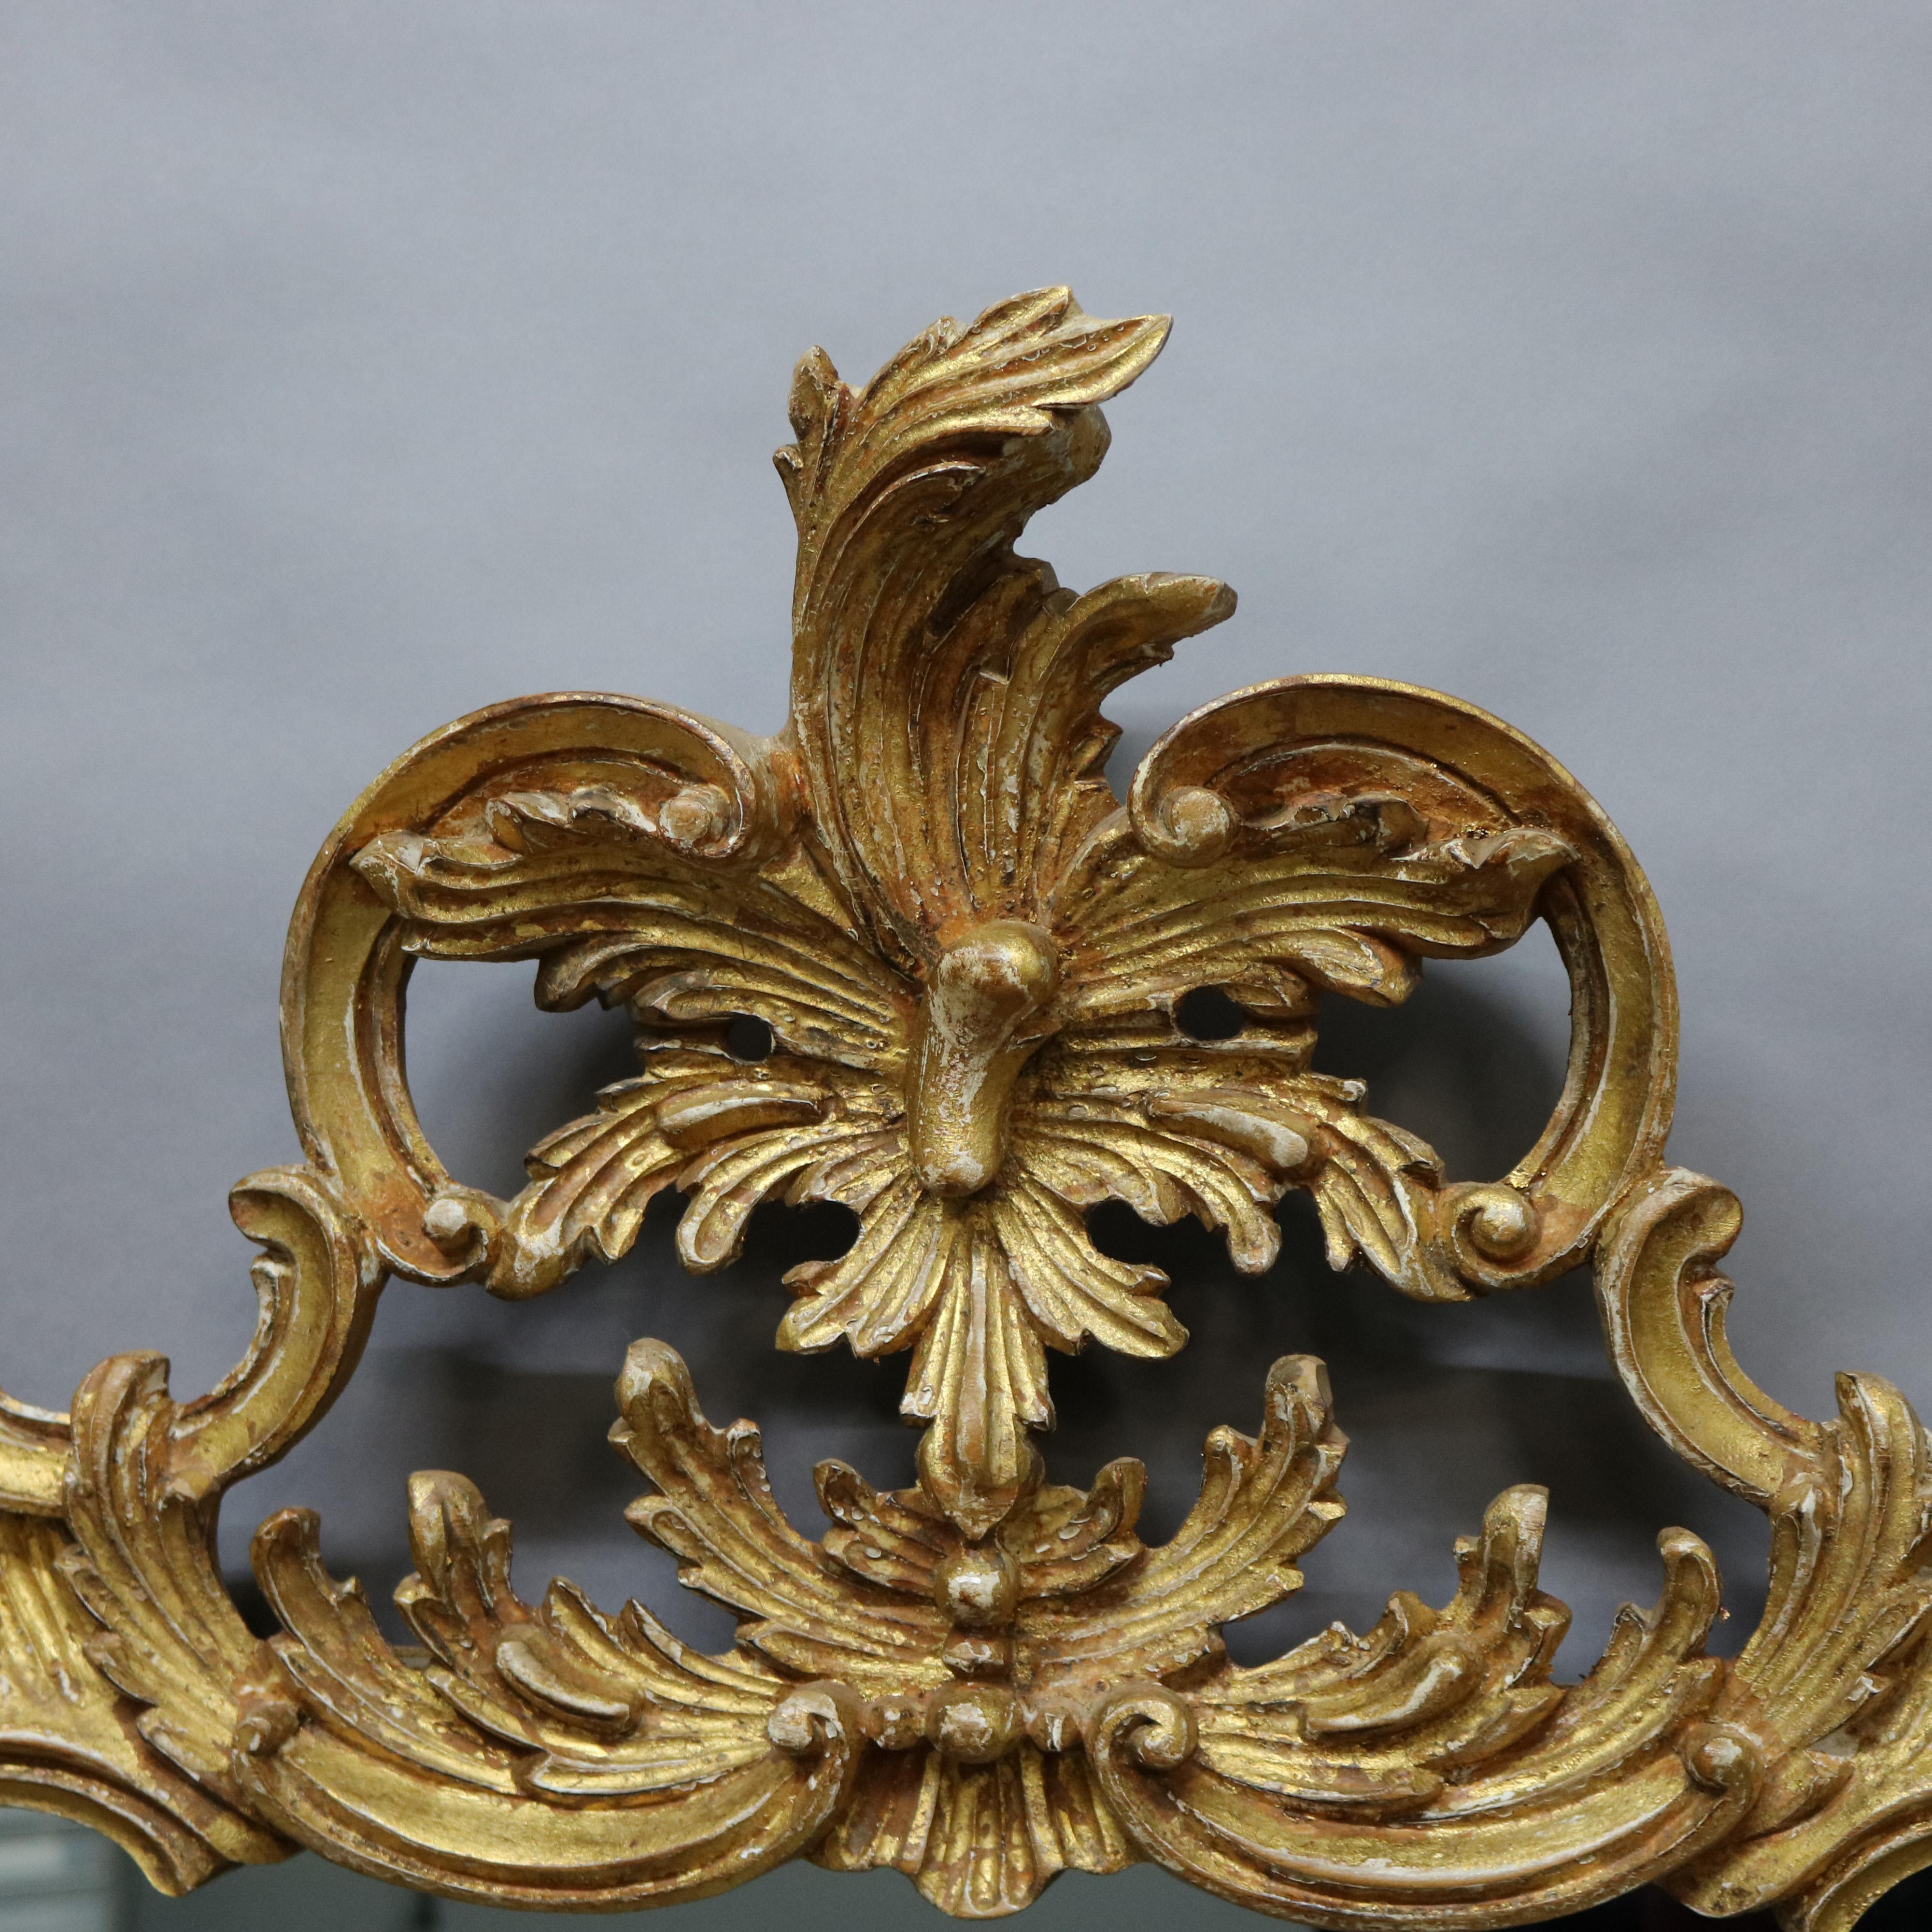 An antique and large Italian Rococo Revival over mantel wall mirror by LaBarge offers foliate and scroll form giltwood frame giltwood wall mirror, 20th century
label on back
Measures: 57